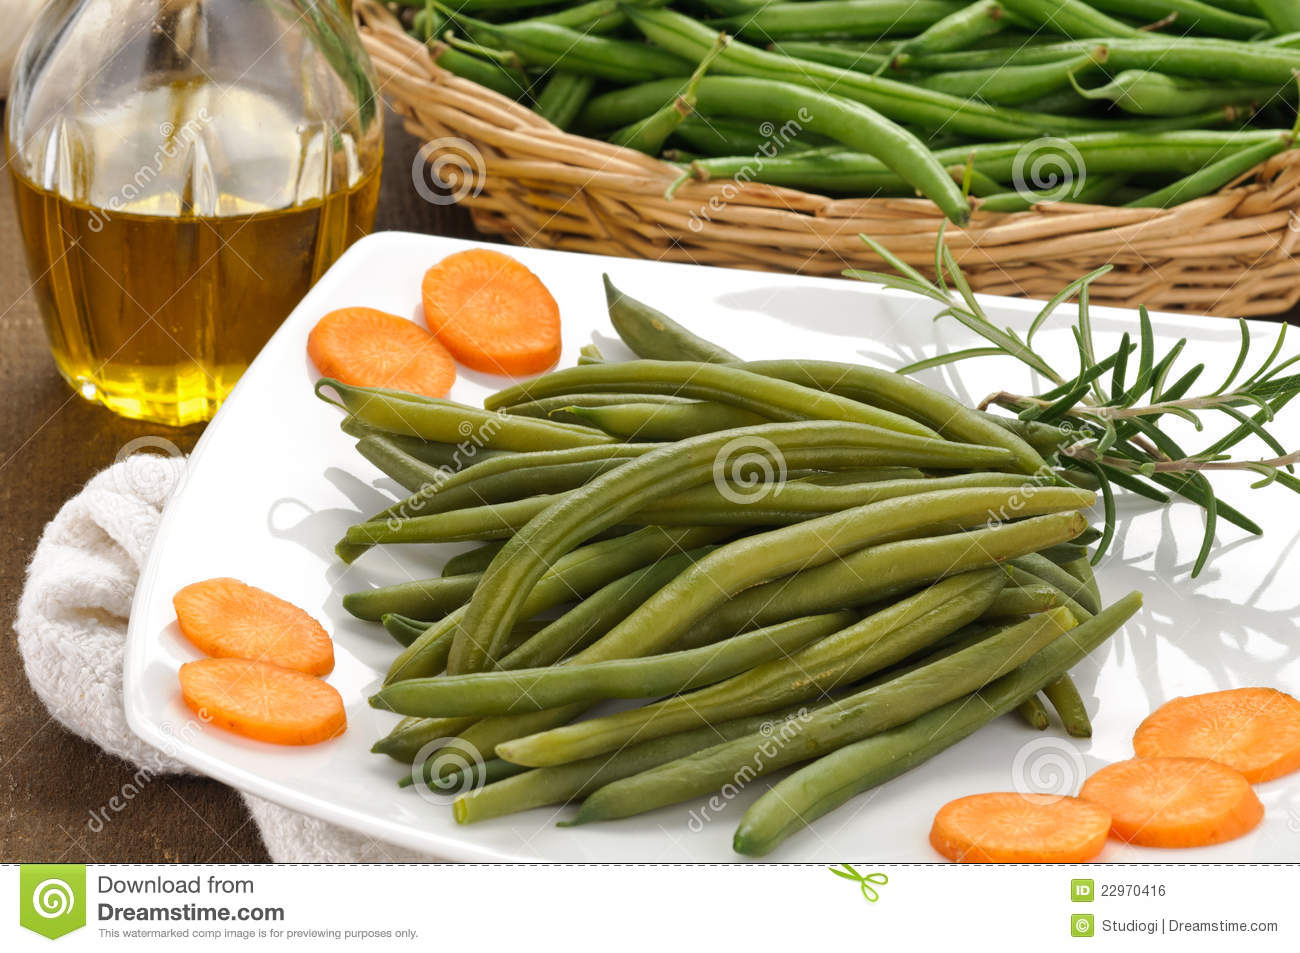 Green Beans Cooked With Oil And Green Beans In The Basket 